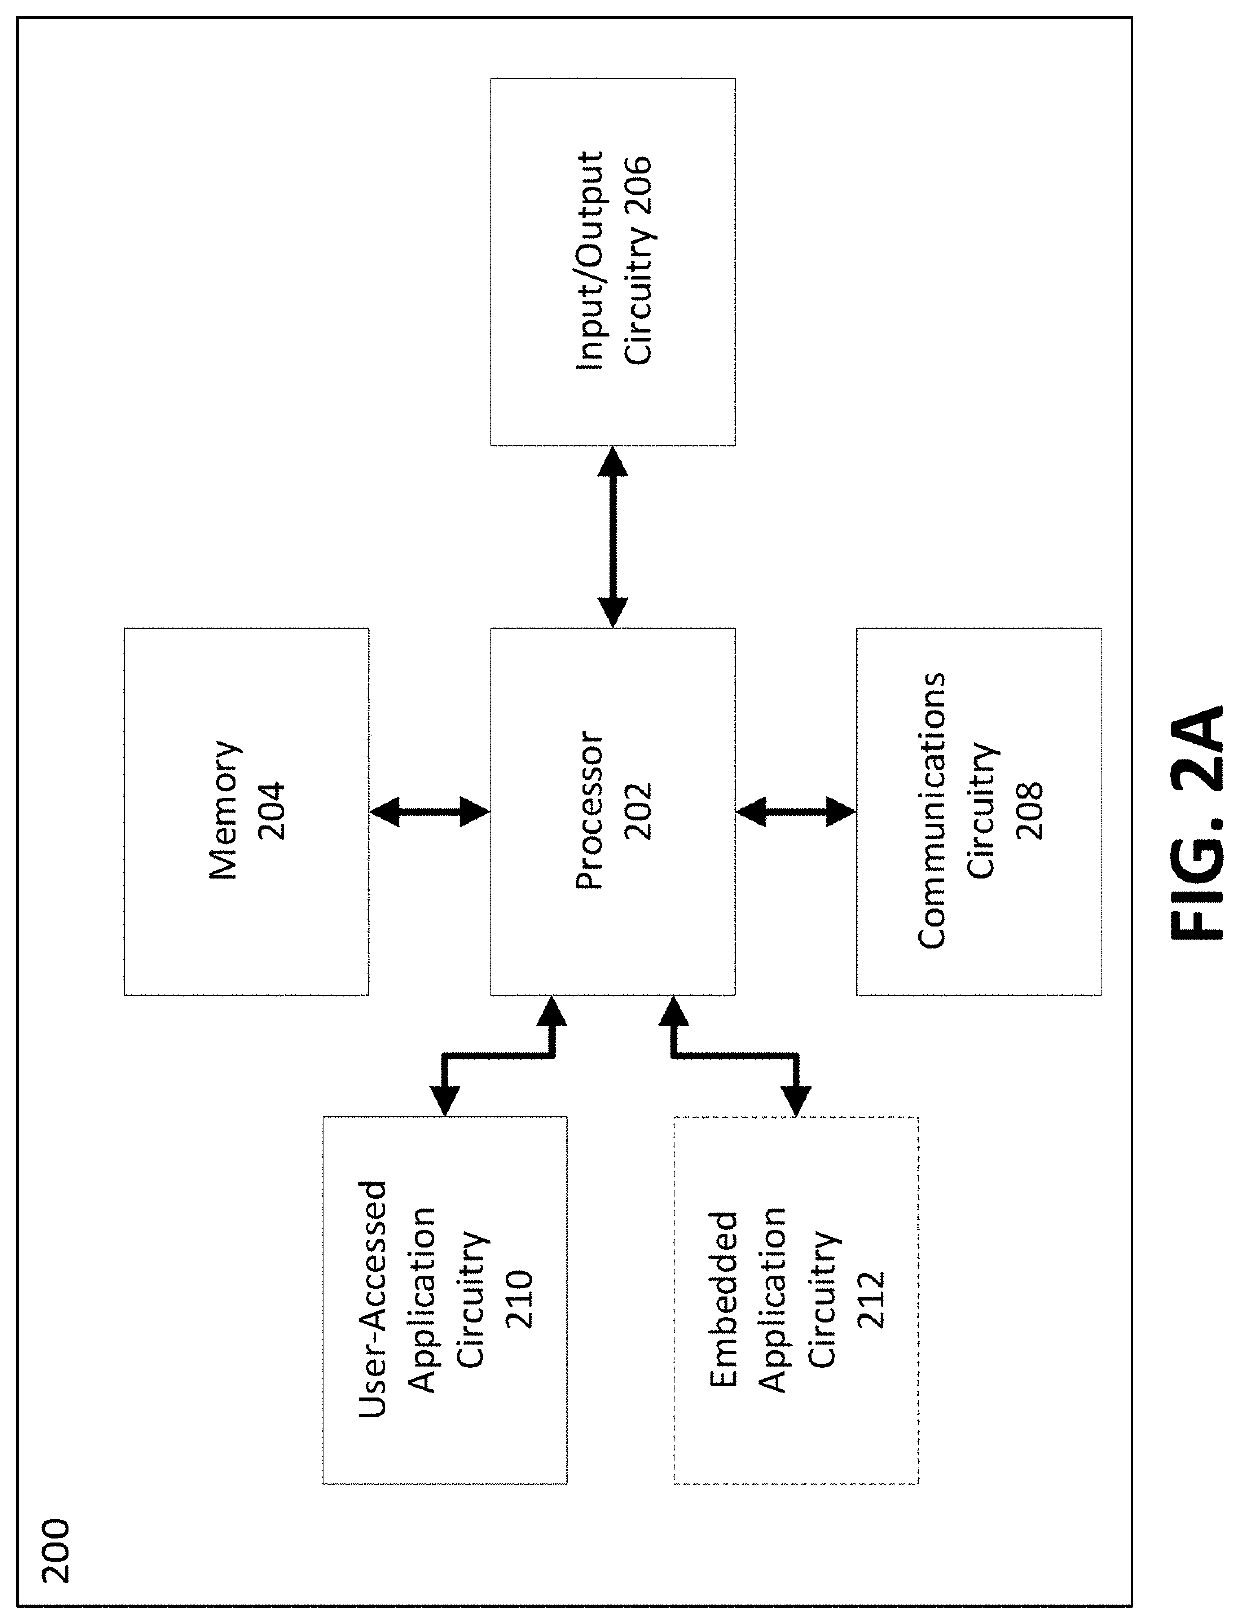 System, method, and computer program product for improved embedded application data management